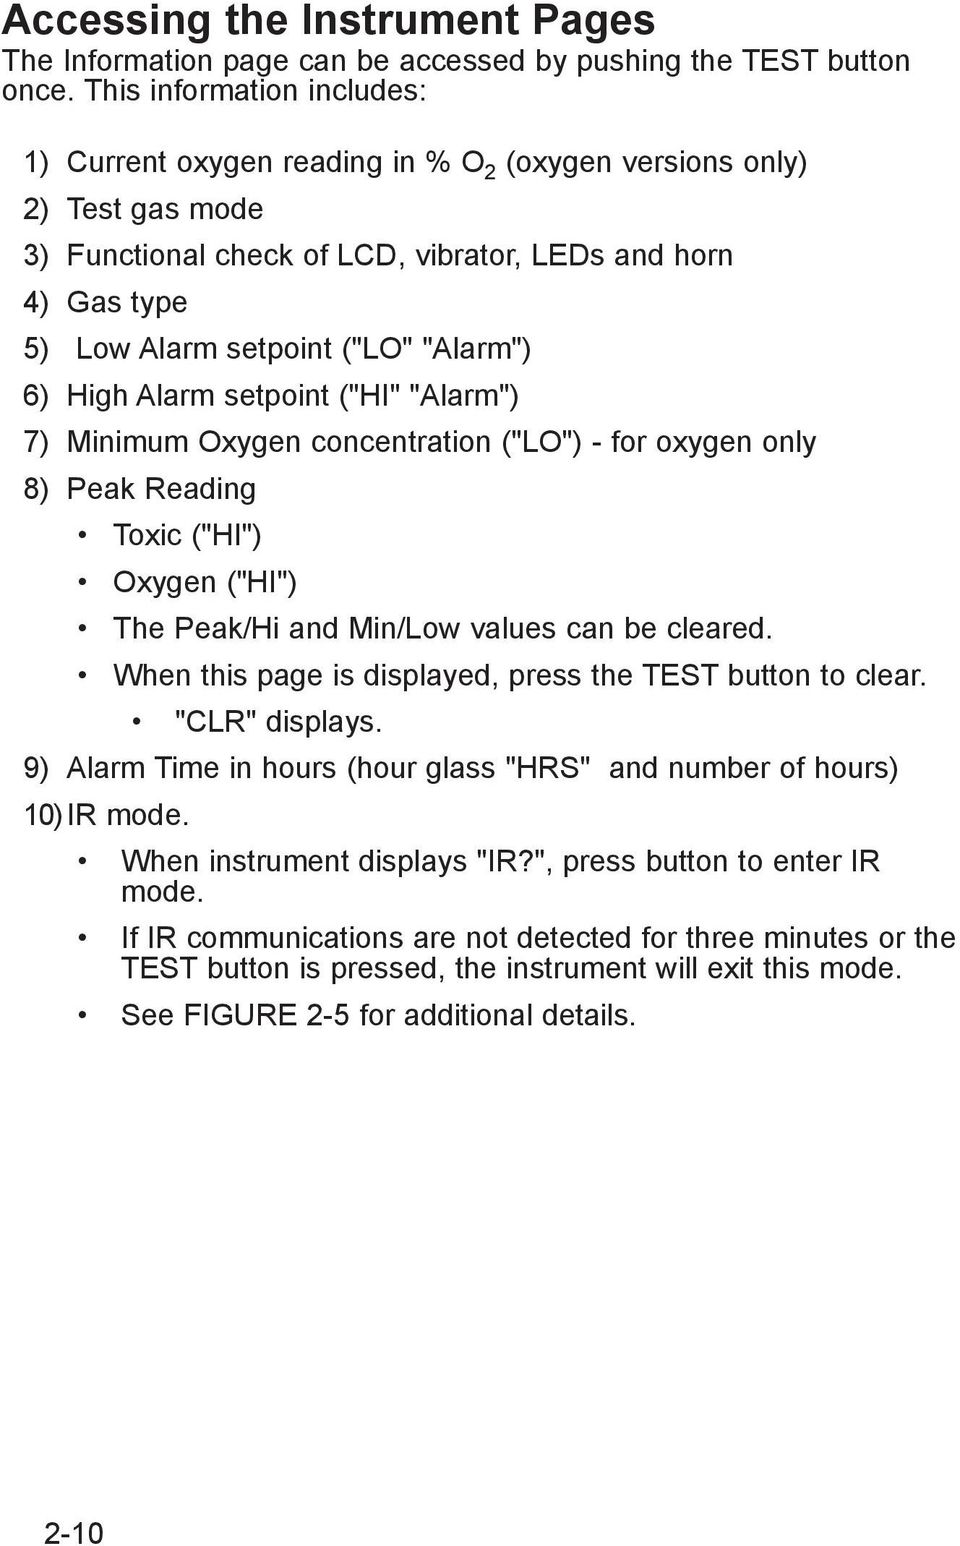 "Alarm") 6) High Alarm setpoint ("HI" "Alarm") 7) Minimum Oxygen concentration ("LO") - for oxygen only 8) Peak Reading Toxic ("HI") Oxygen ("HI") The Peak/Hi and Min/Low values can be cleared.